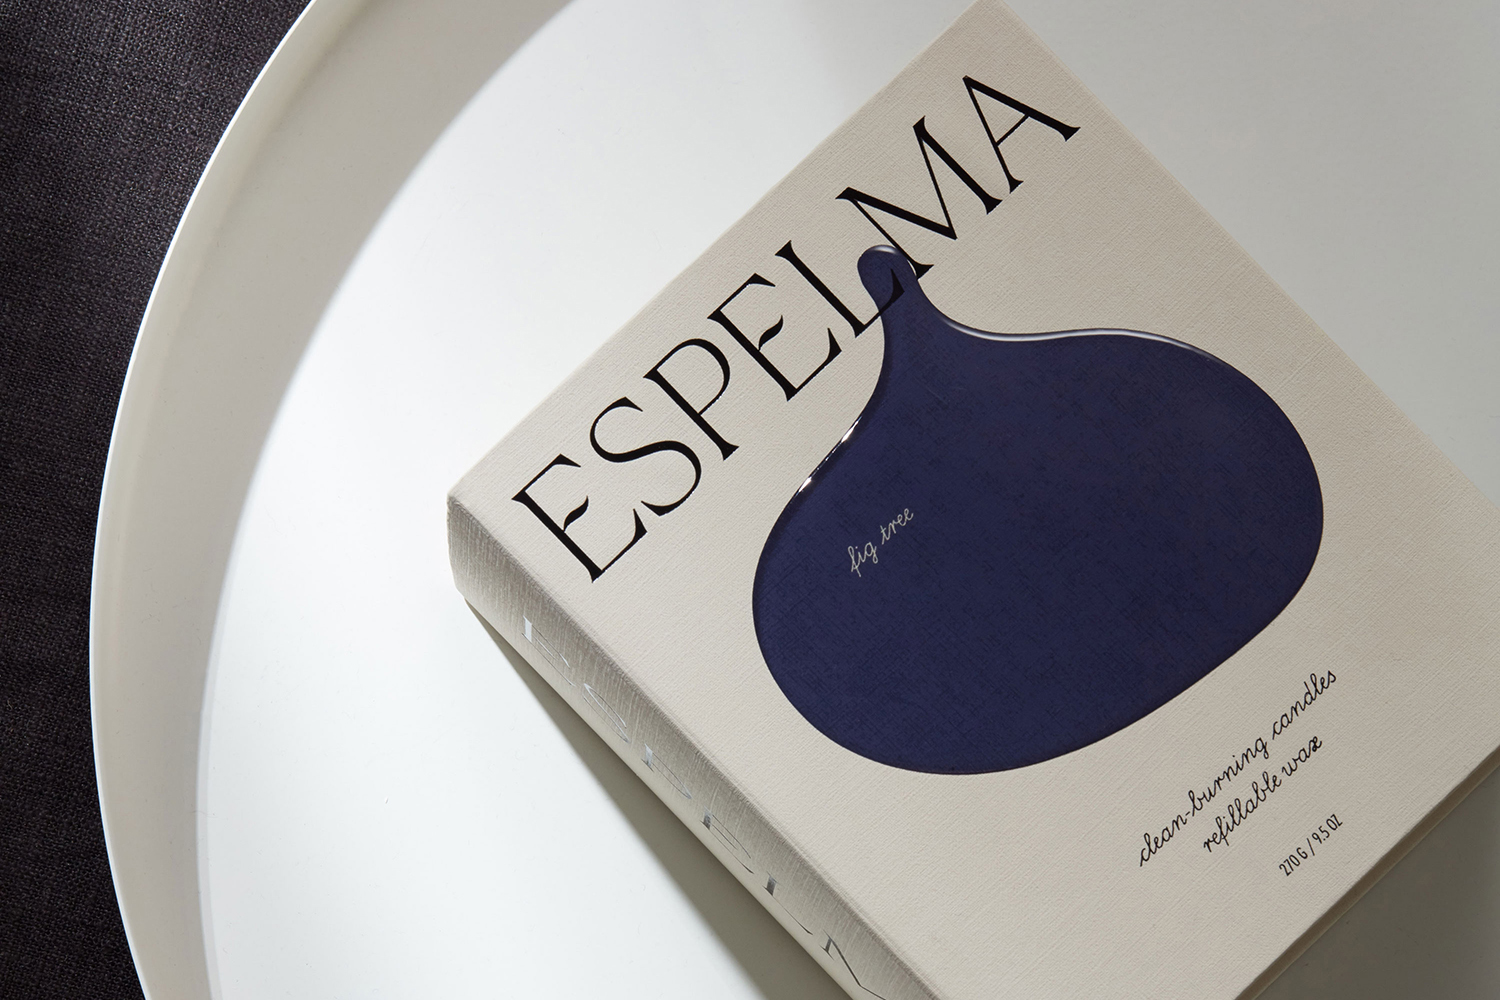 Modern Luxury Packaging – Espelma by Commission